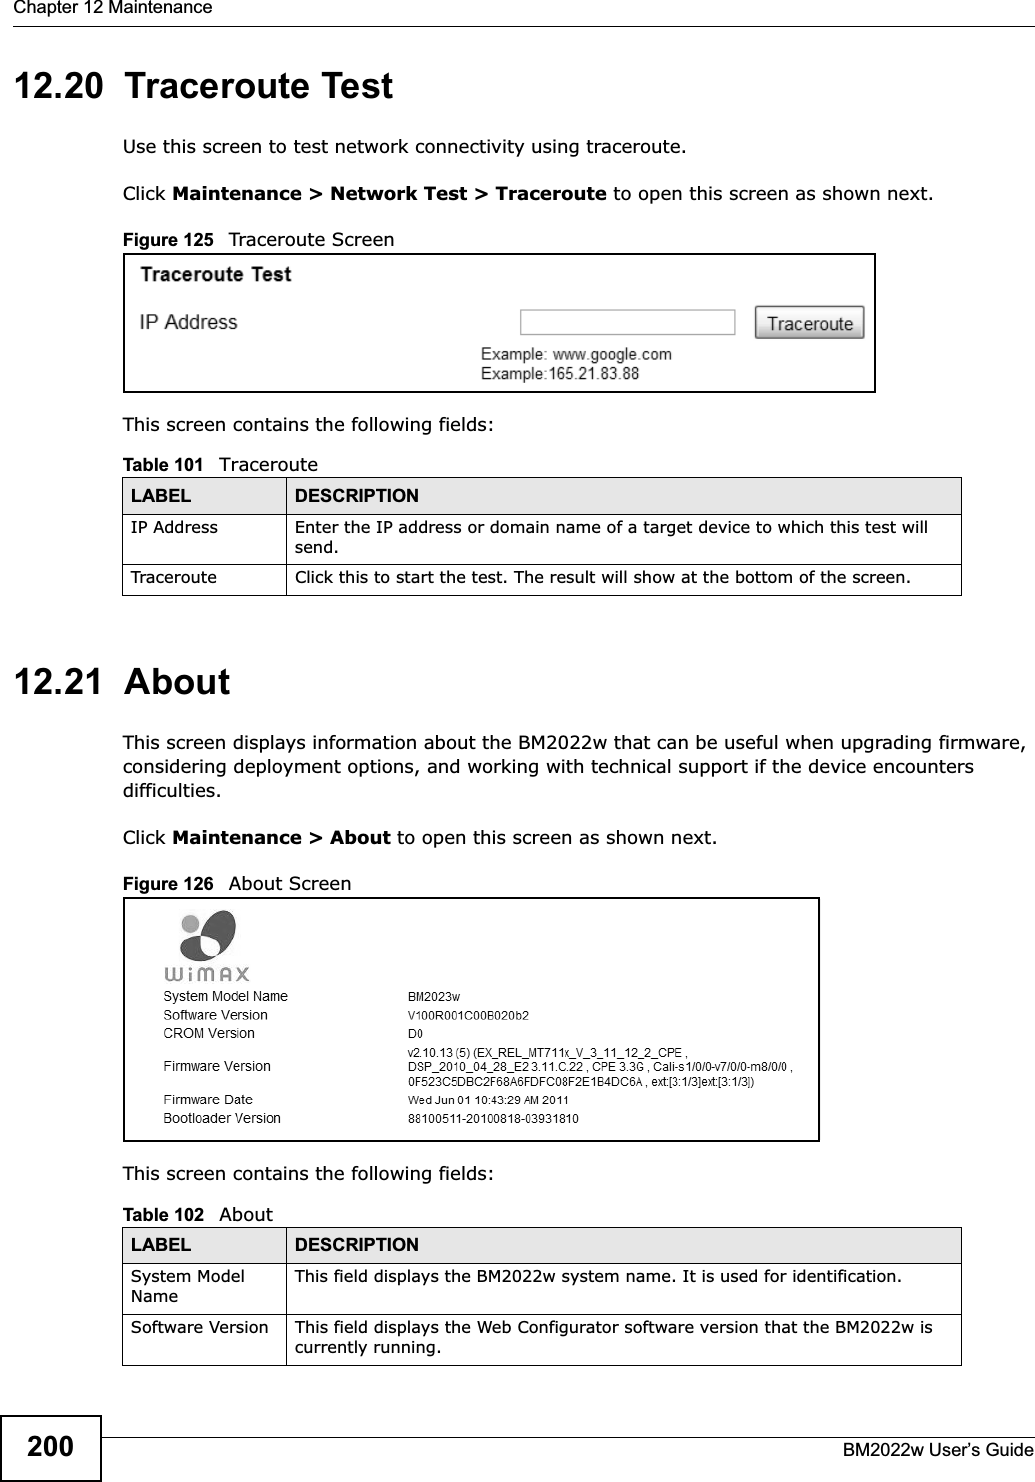 Chapter 12 MaintenanceBM2022w User’s Guide20012.20  Traceroute TestUse this screen to test network connectivity using traceroute.Click Maintenance &gt; Network Test &gt; Traceroute to open this screen as shown next.Figure 125   Traceroute ScreenThis screen contains the following fields:12.21  AboutThis screen displays information about the BM2022w that can be useful when upgrading firmware, considering deployment options, and working with technical support if the device encounters difficulties.Click Maintenance &gt; About to open this screen as shown next.Figure 126   About ScreenThis screen contains the following fields:Table 101   TracerouteLABEL DESCRIPTIONIP Address Enter the IP address or domain name of a target device to which this test will send.Traceroute Click this to start the test. The result will show at the bottom of the screen.Table 102   AboutLABEL DESCRIPTIONSystem Model NameThis field displays the BM2022w system name. It is used for identification. Software Version This field displays the Web Configurator software version that the BM2022w is currently running.